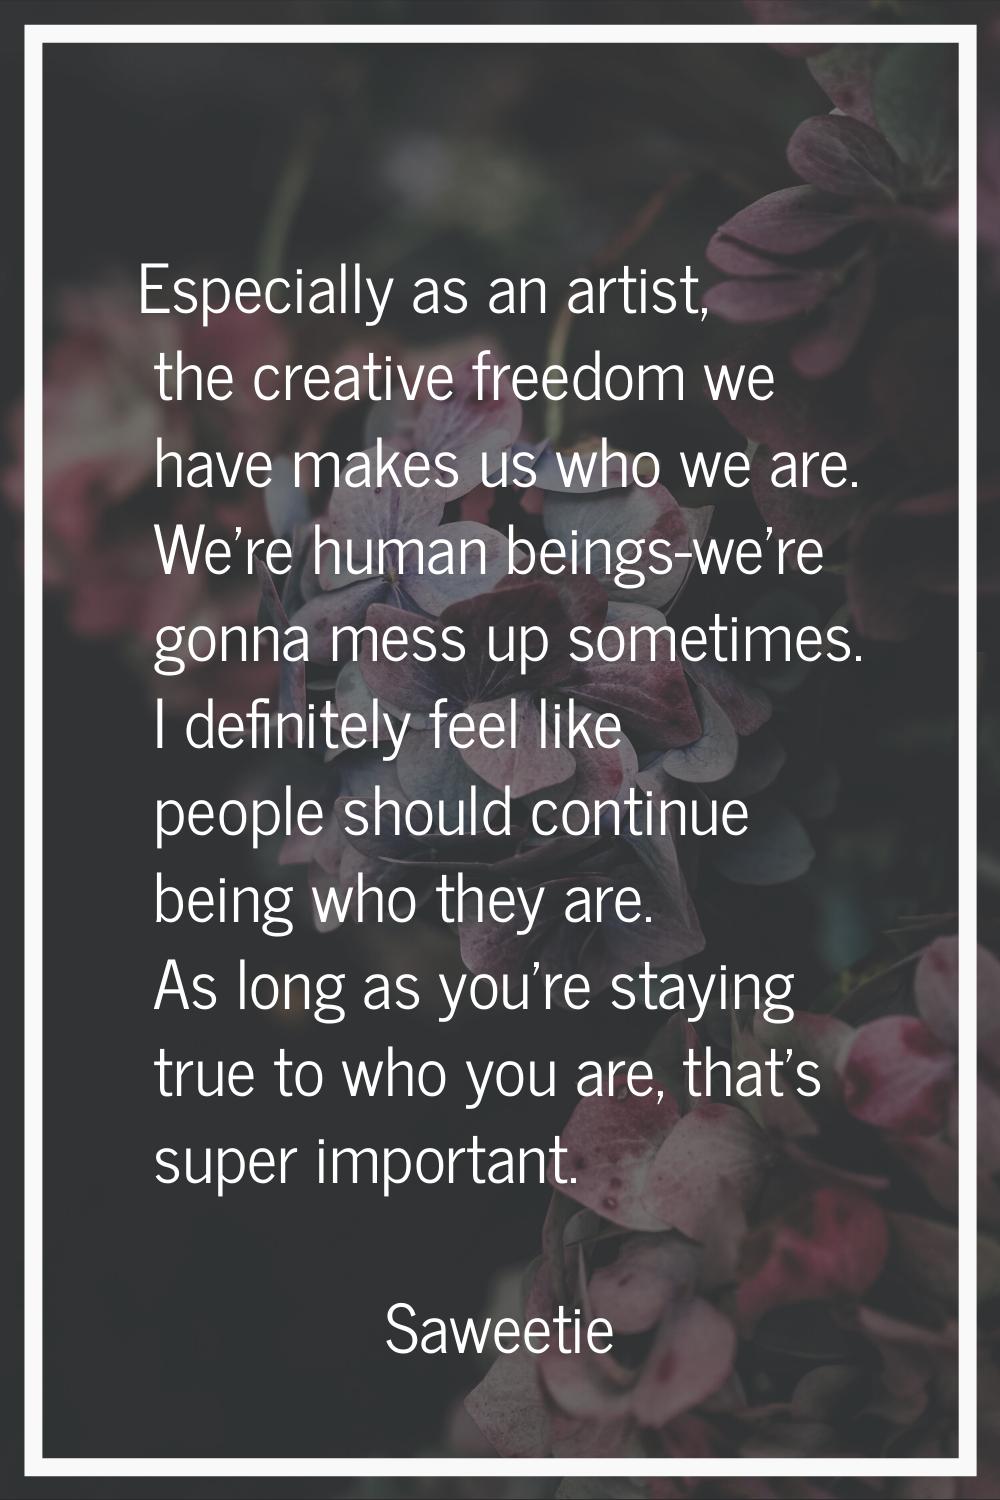 Especially as an artist, the creative freedom we have makes us who we are. We're human beings-we're